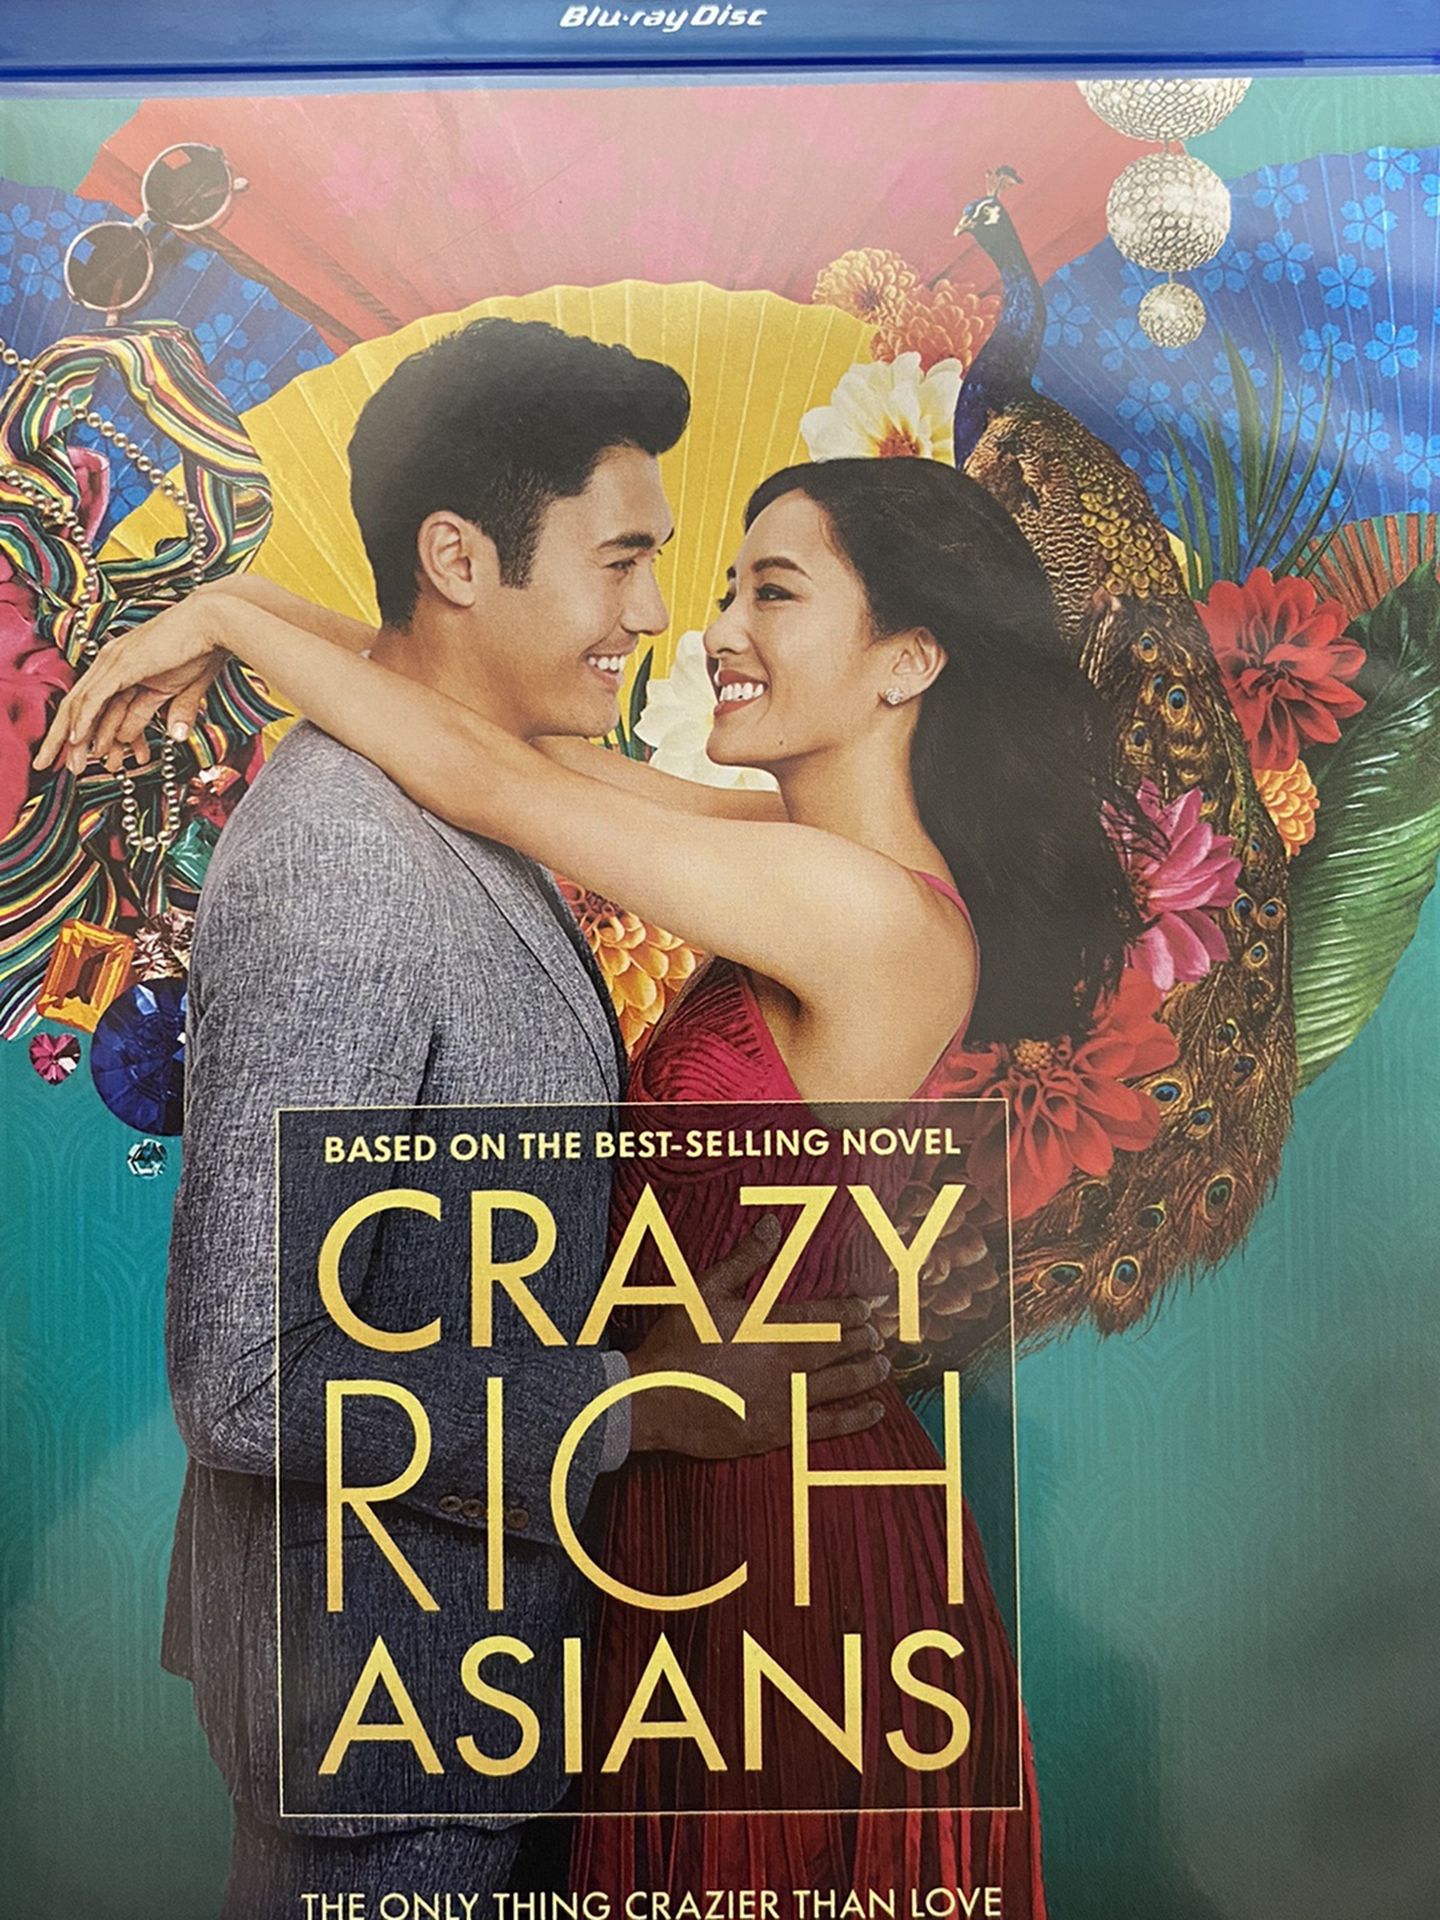 Crazy Rich Asians (Blu Ray And DVD Combo, 2018)